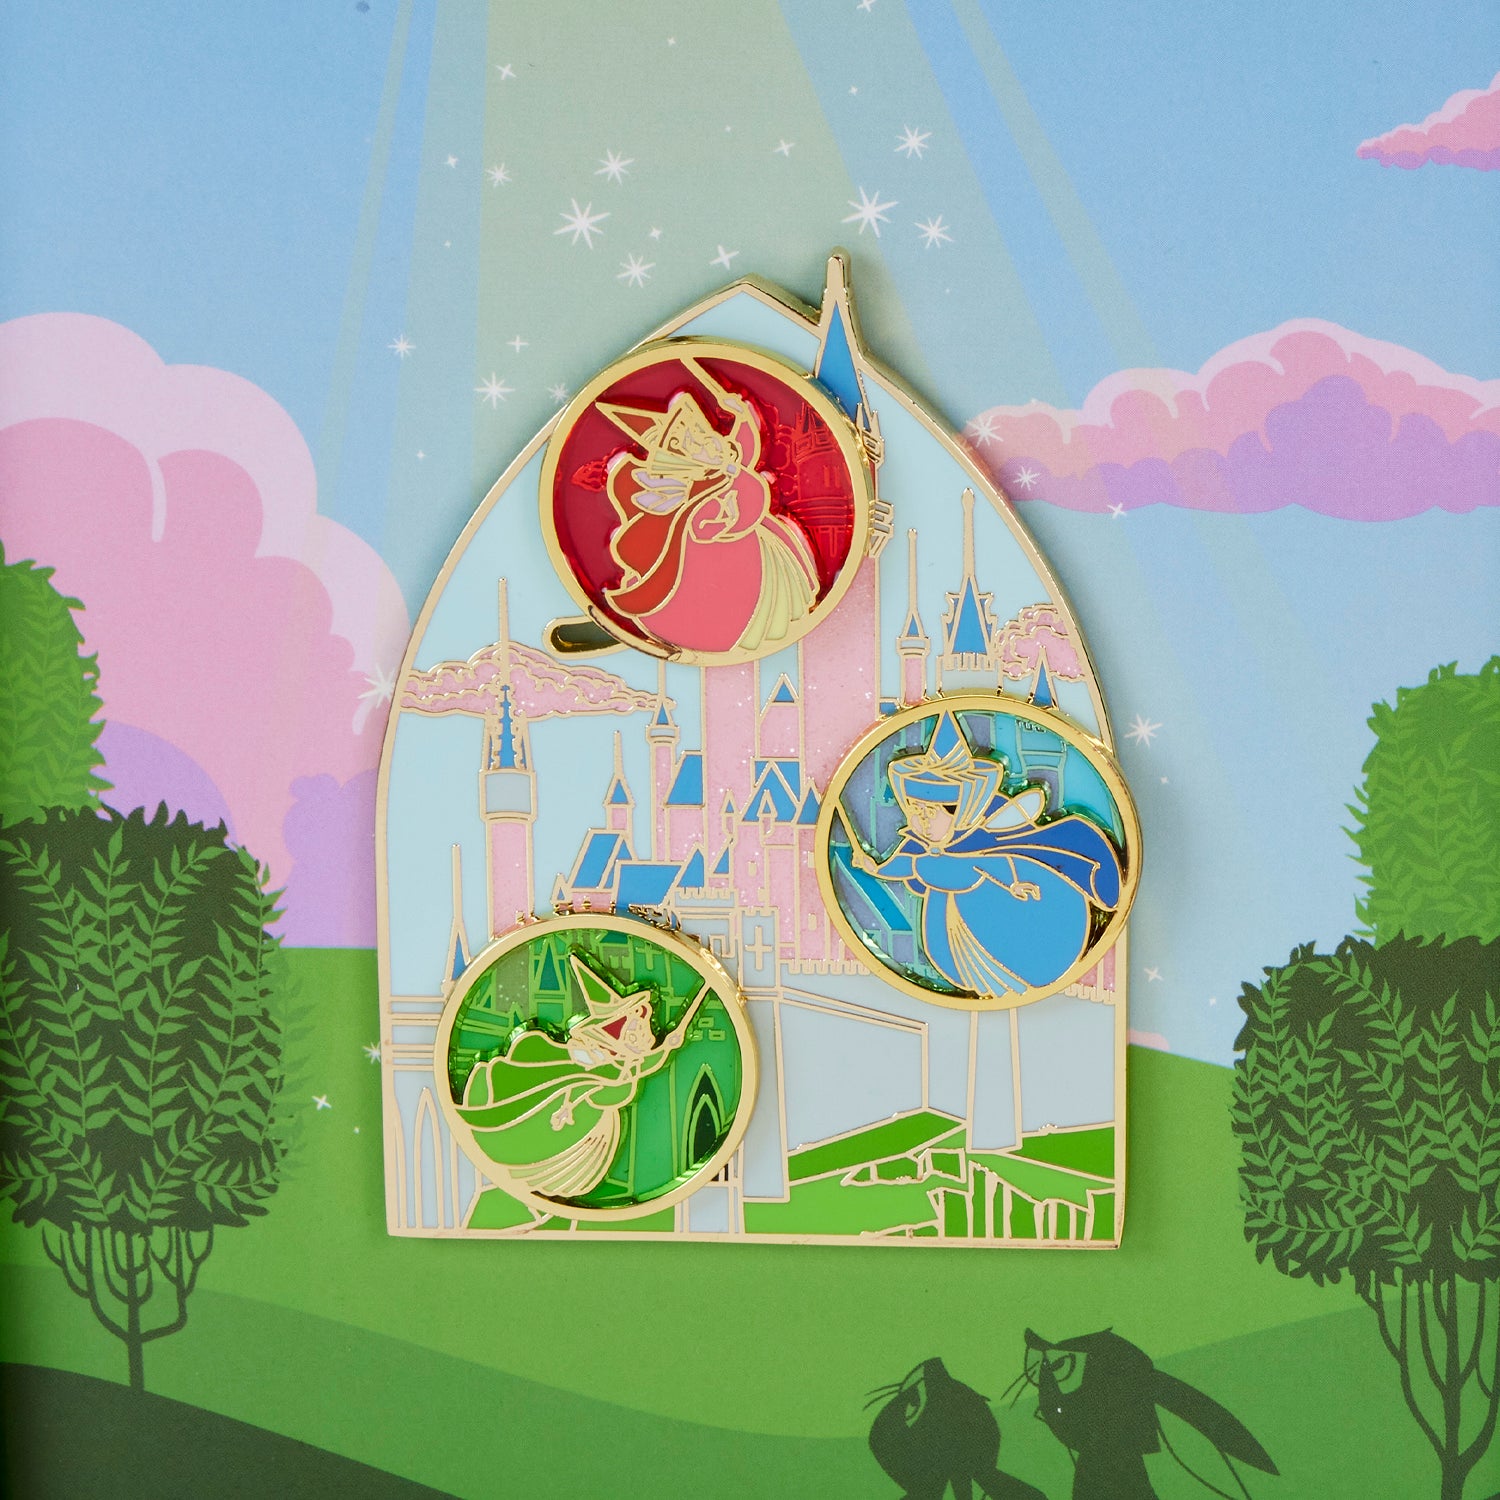 Loungefly Disney Sleeping Beauty Stained Glass Fairies 3" Limited Edition Collector Box Pin